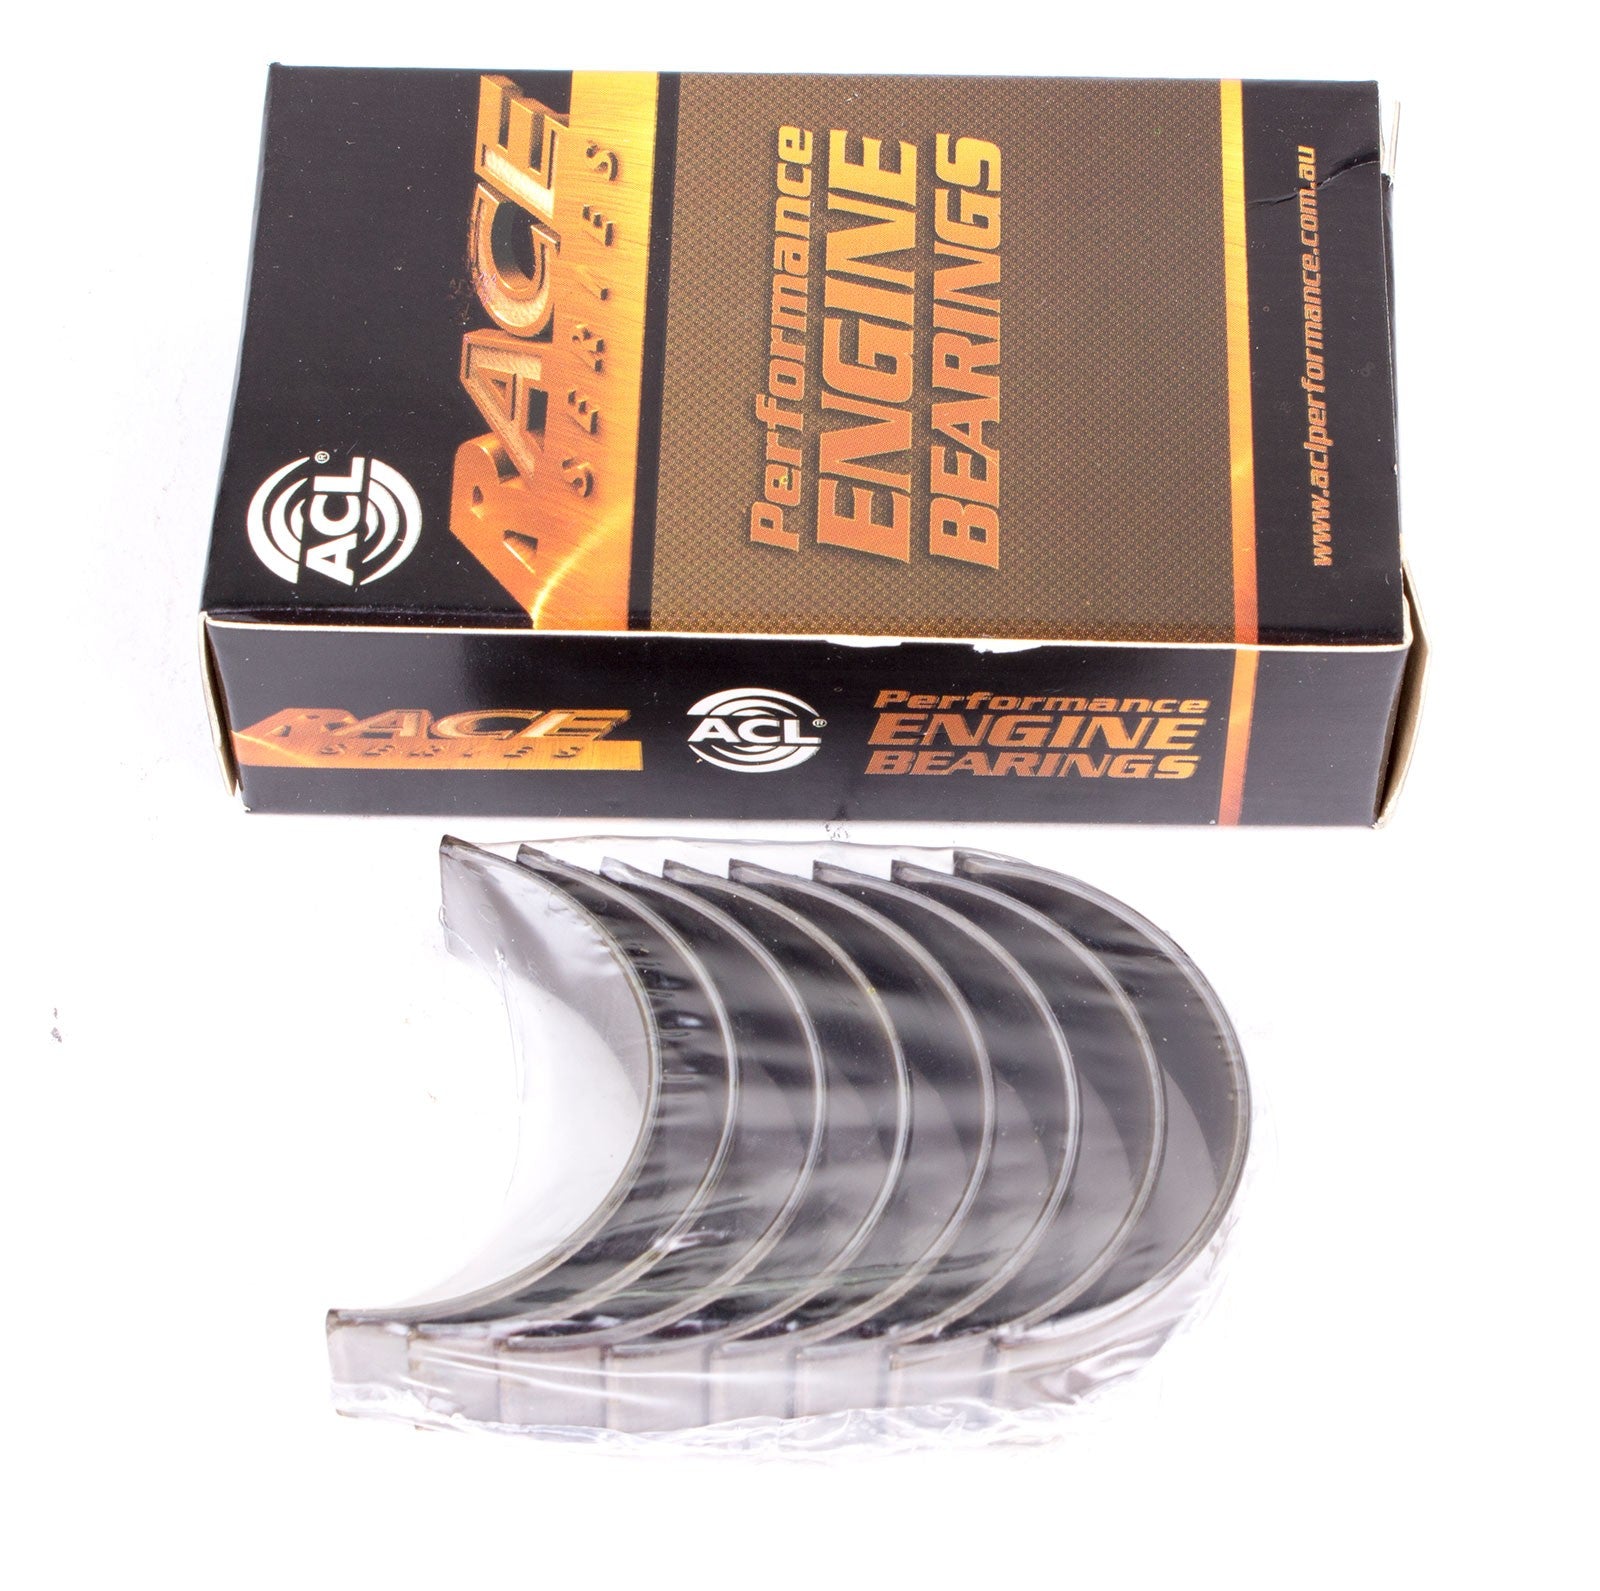 ACL 4B1489H-.25 Con rod bearing set (ACL Race Series) Photo-0 